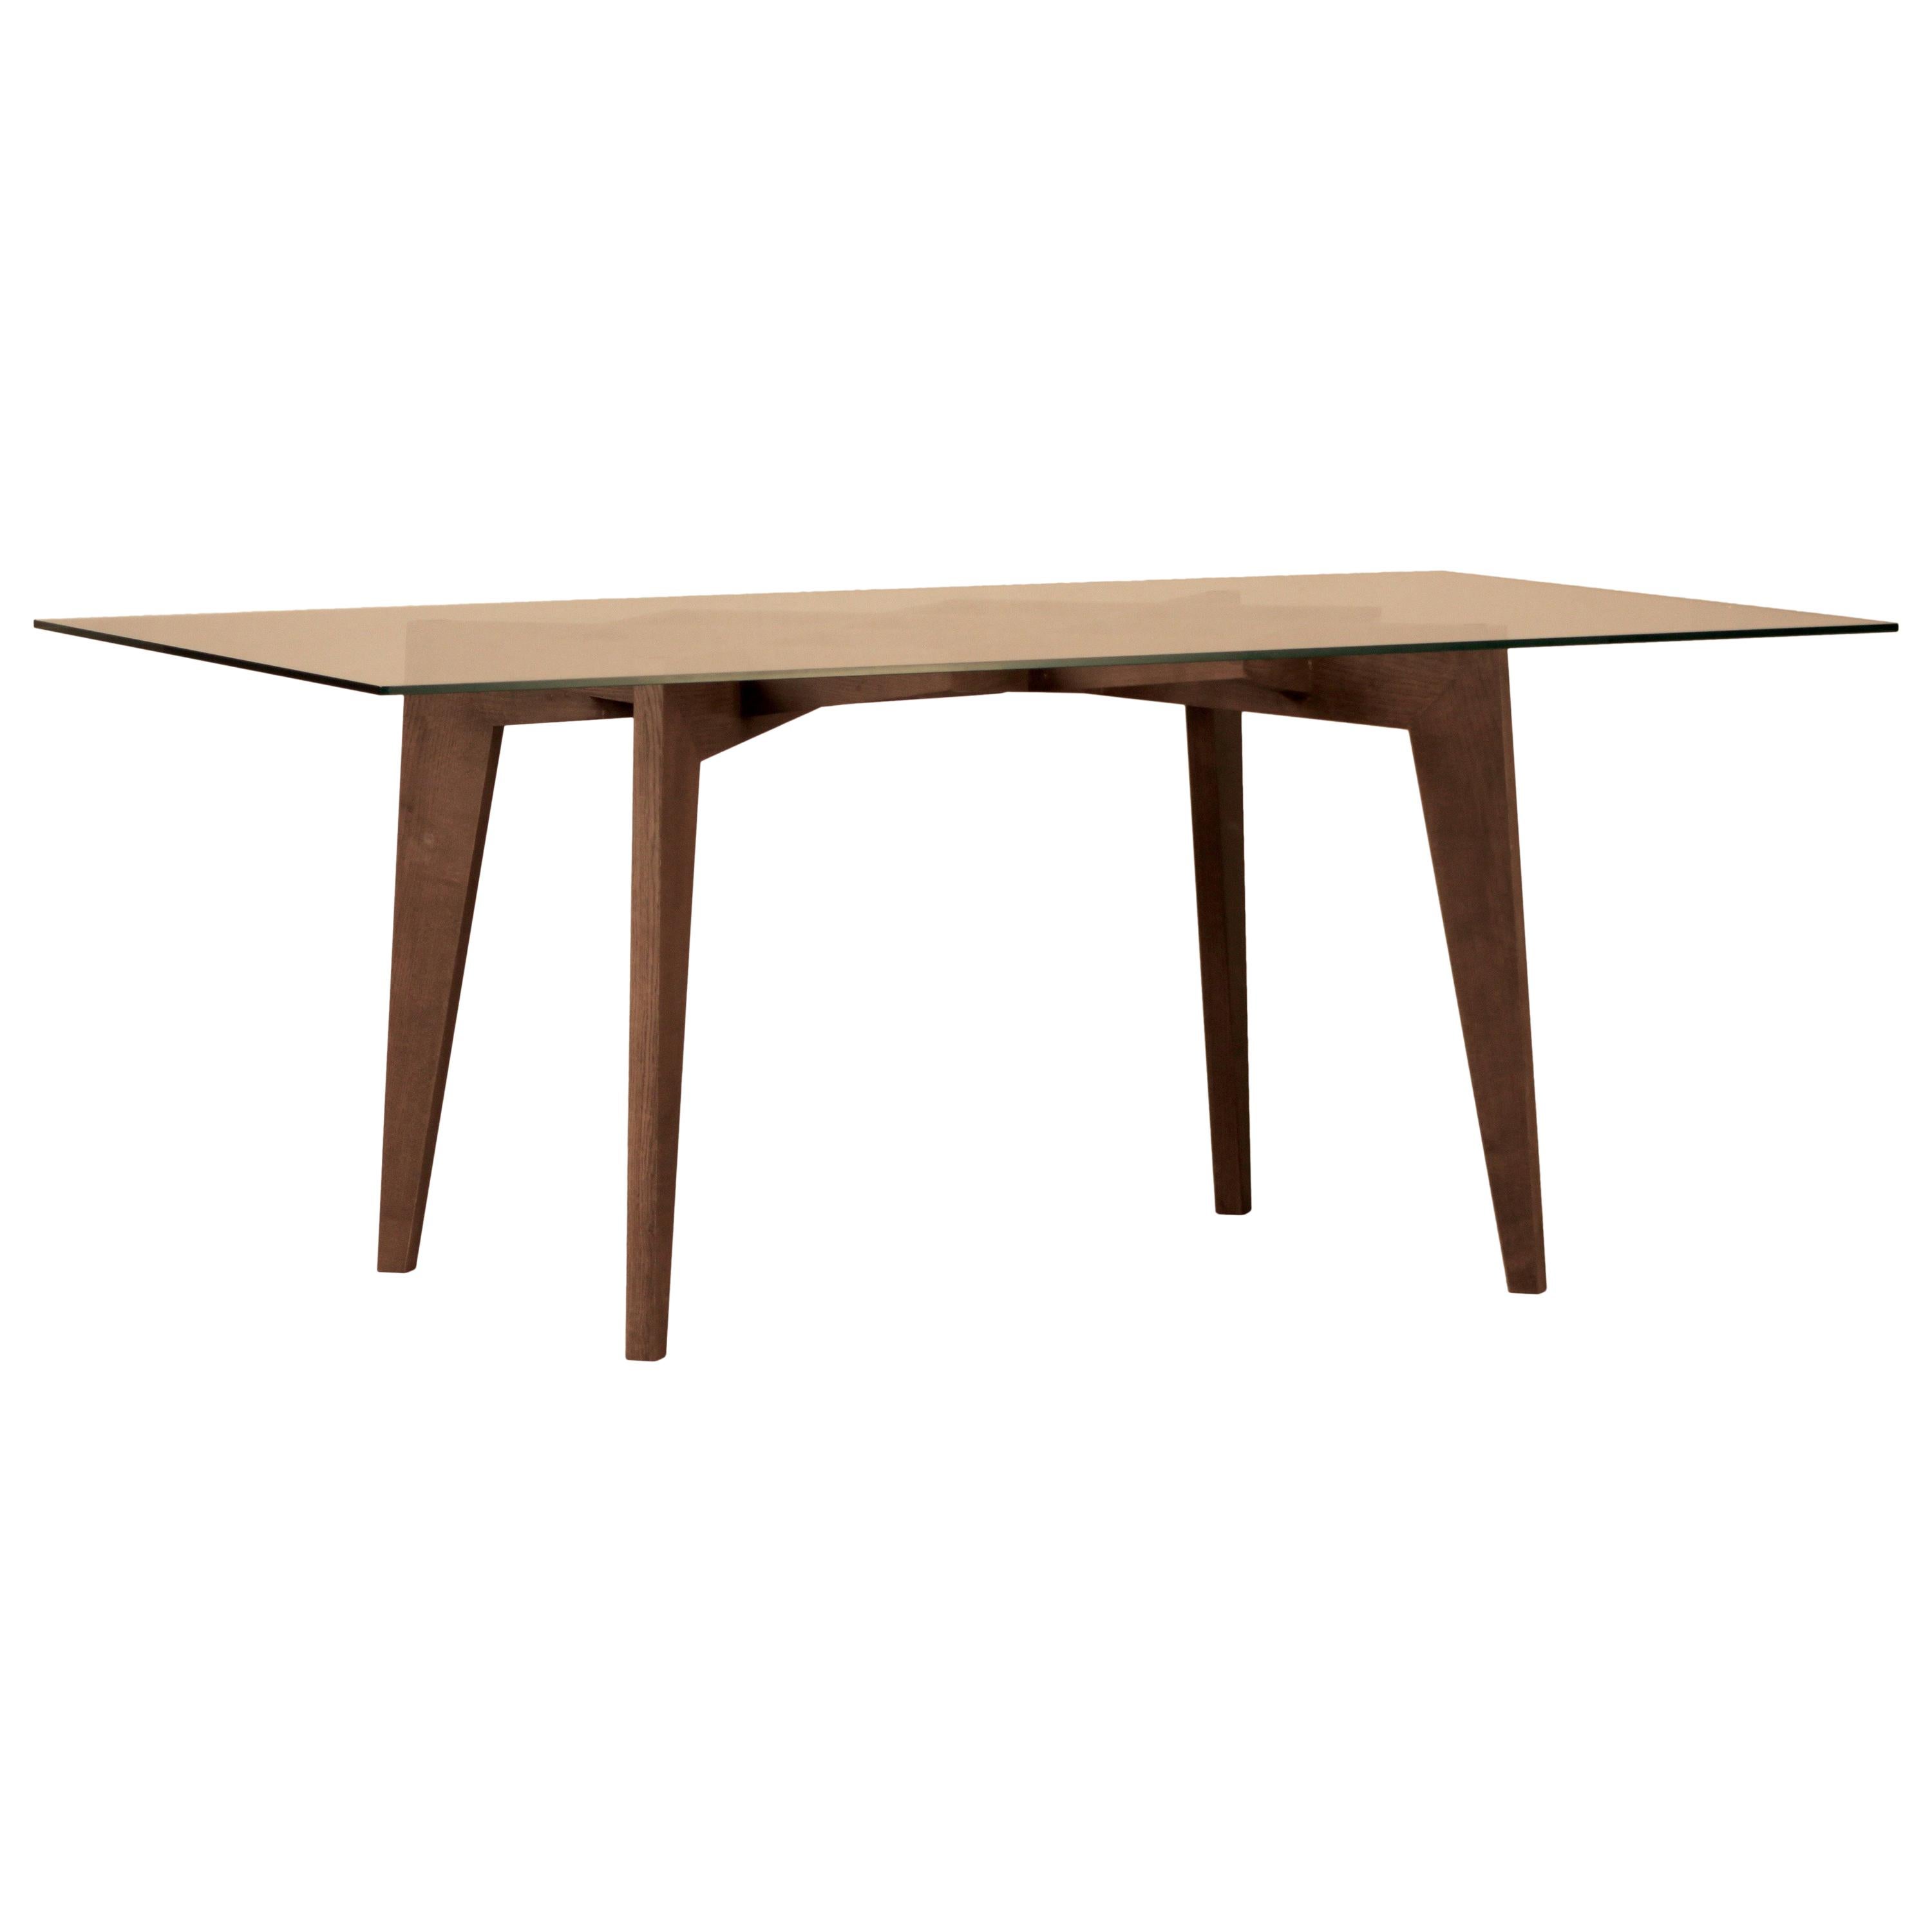 Morelat, Contemporary Table Made of Ashwood with Interlocking Legs and Glass Top